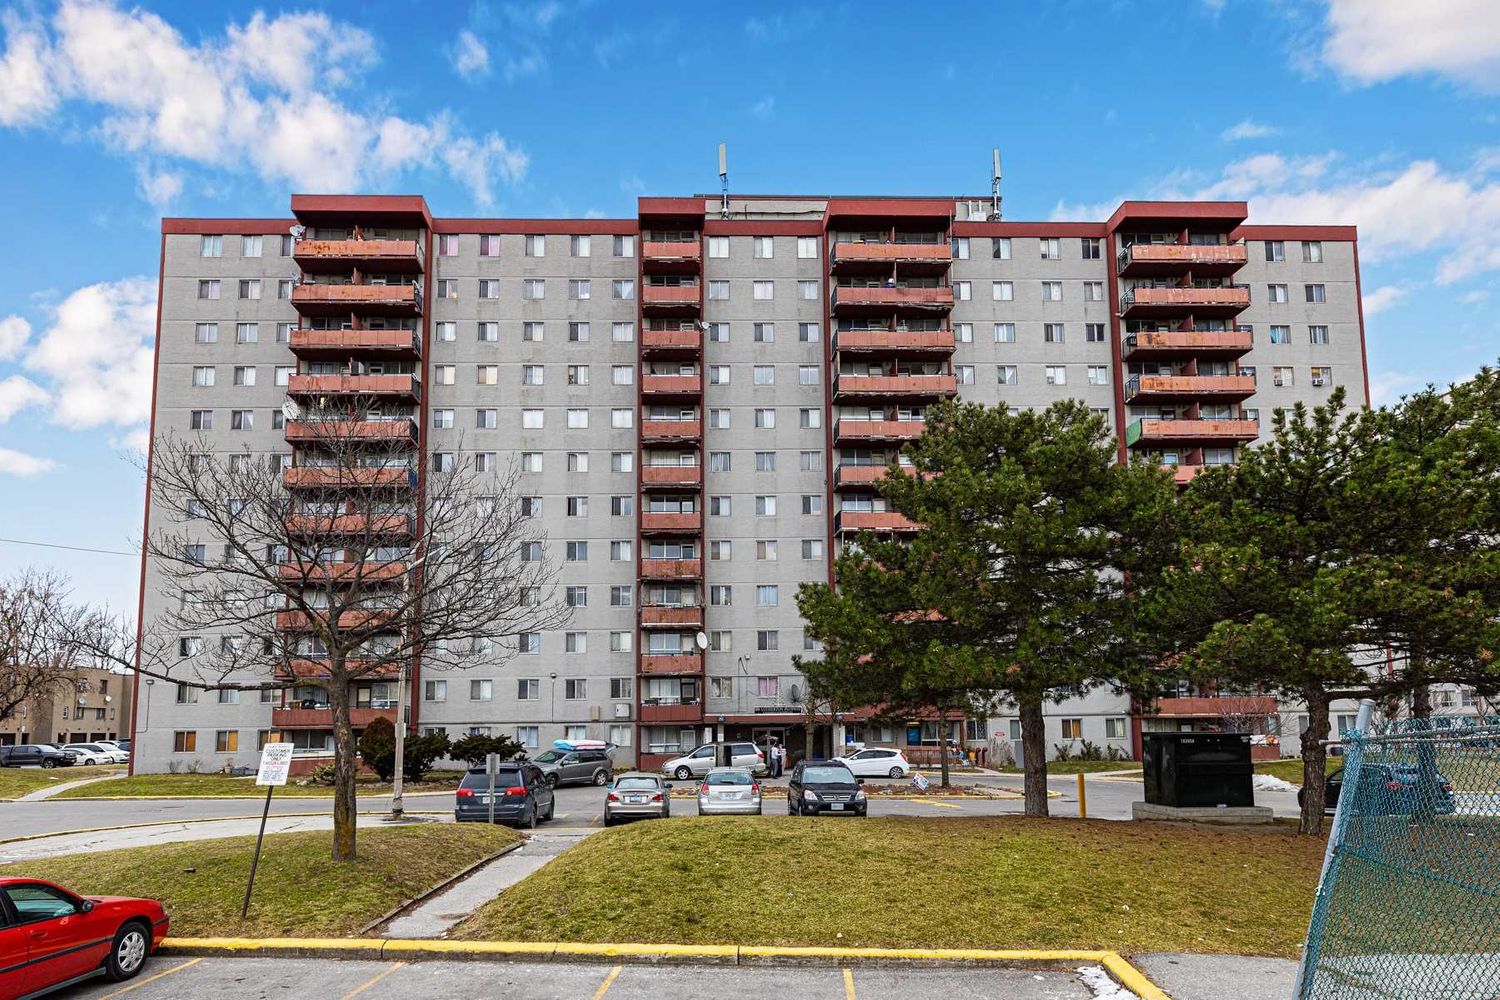 940 Caledonia Road. 50 Lotherton Condos is located in  North York, Toronto - image #1 of 2